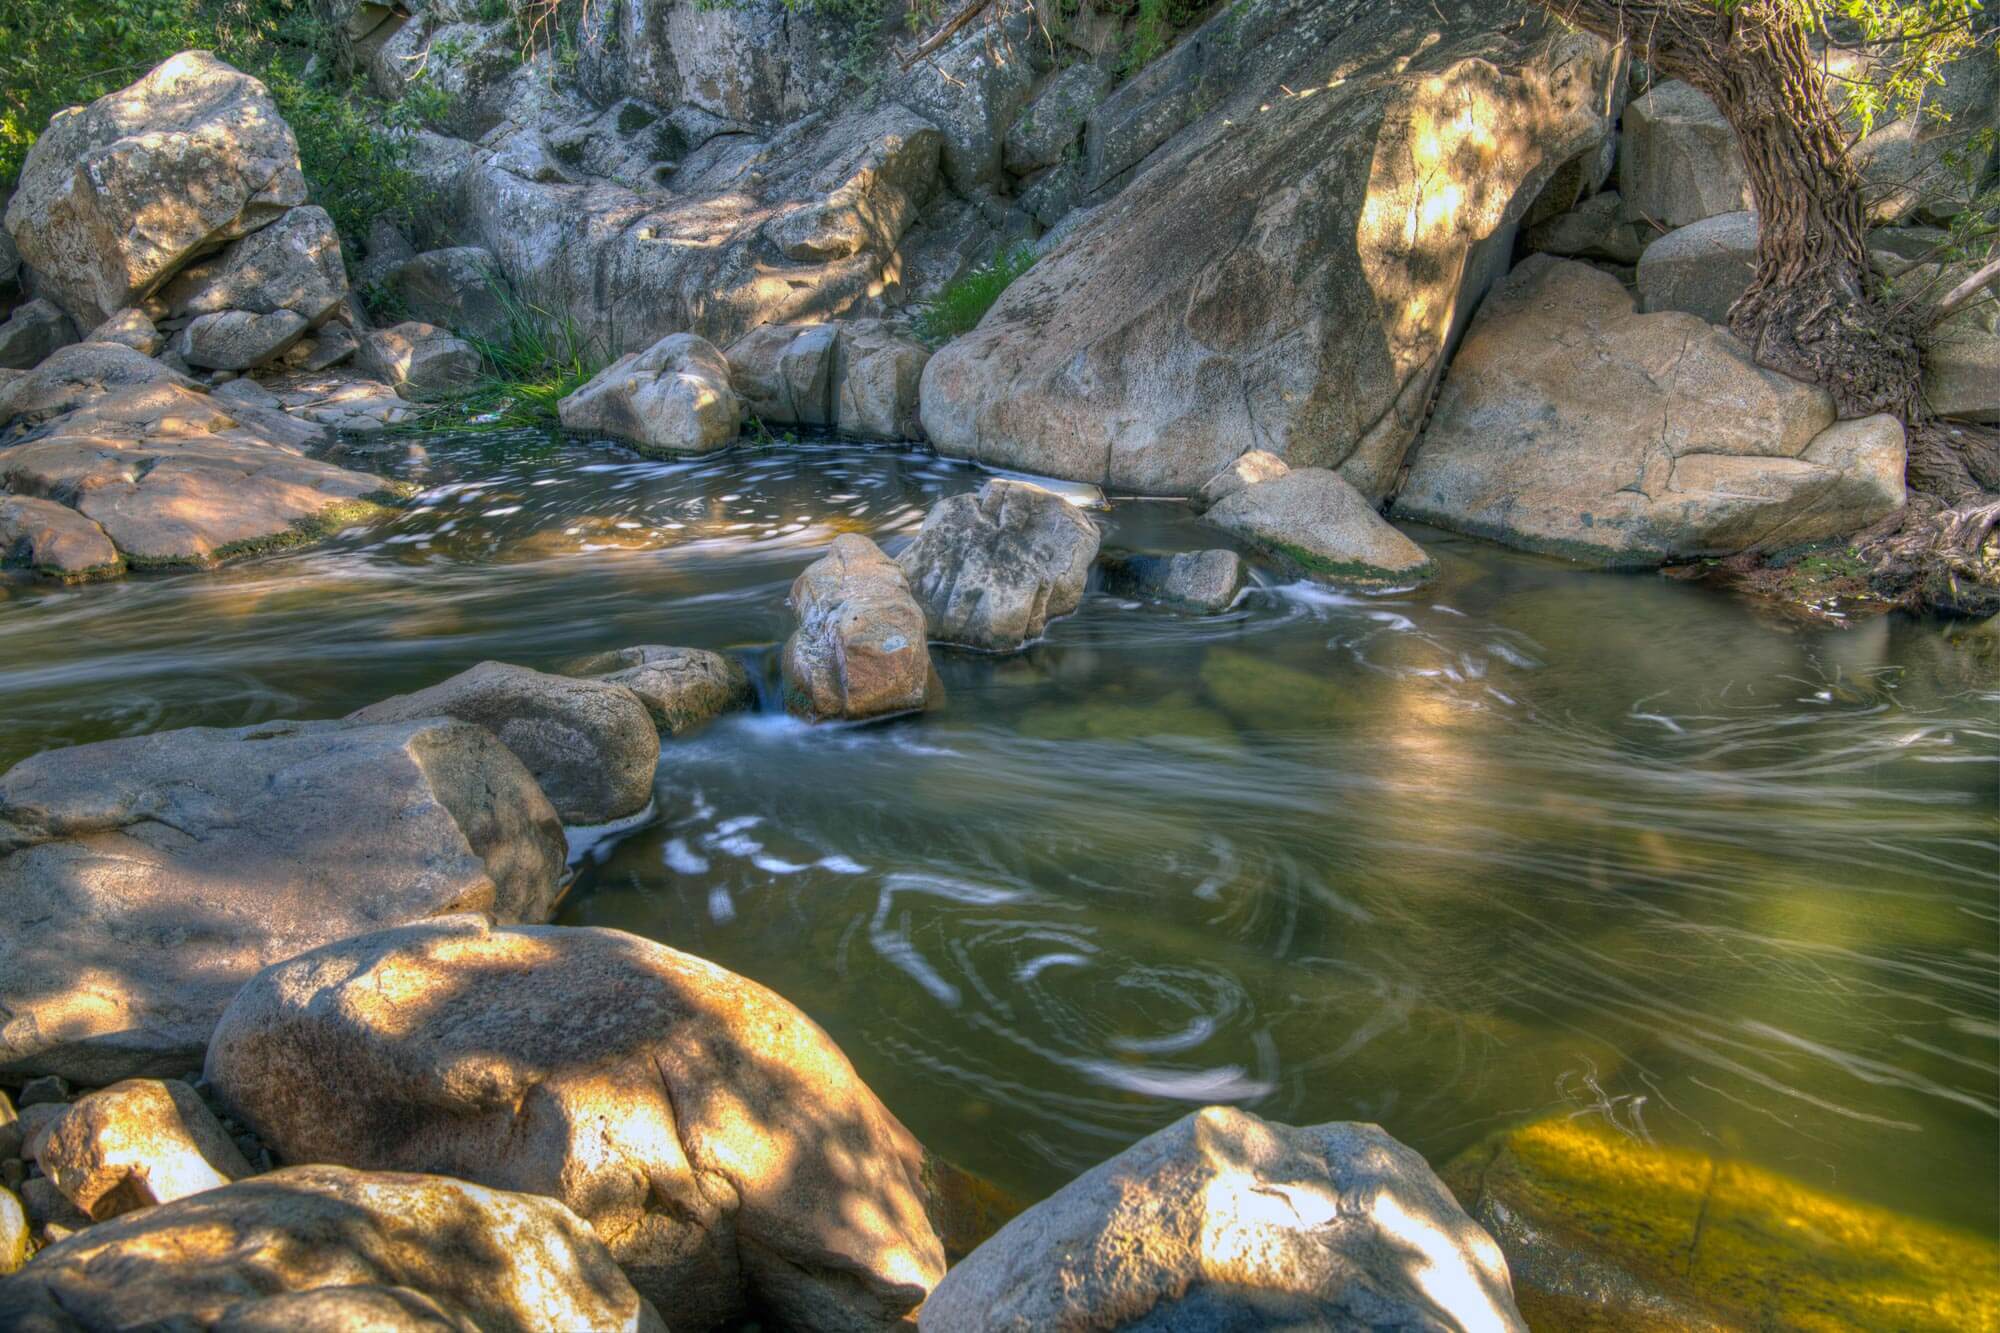 Swirling water at the end of waterfall in Elfin Forest Recreational Reserve